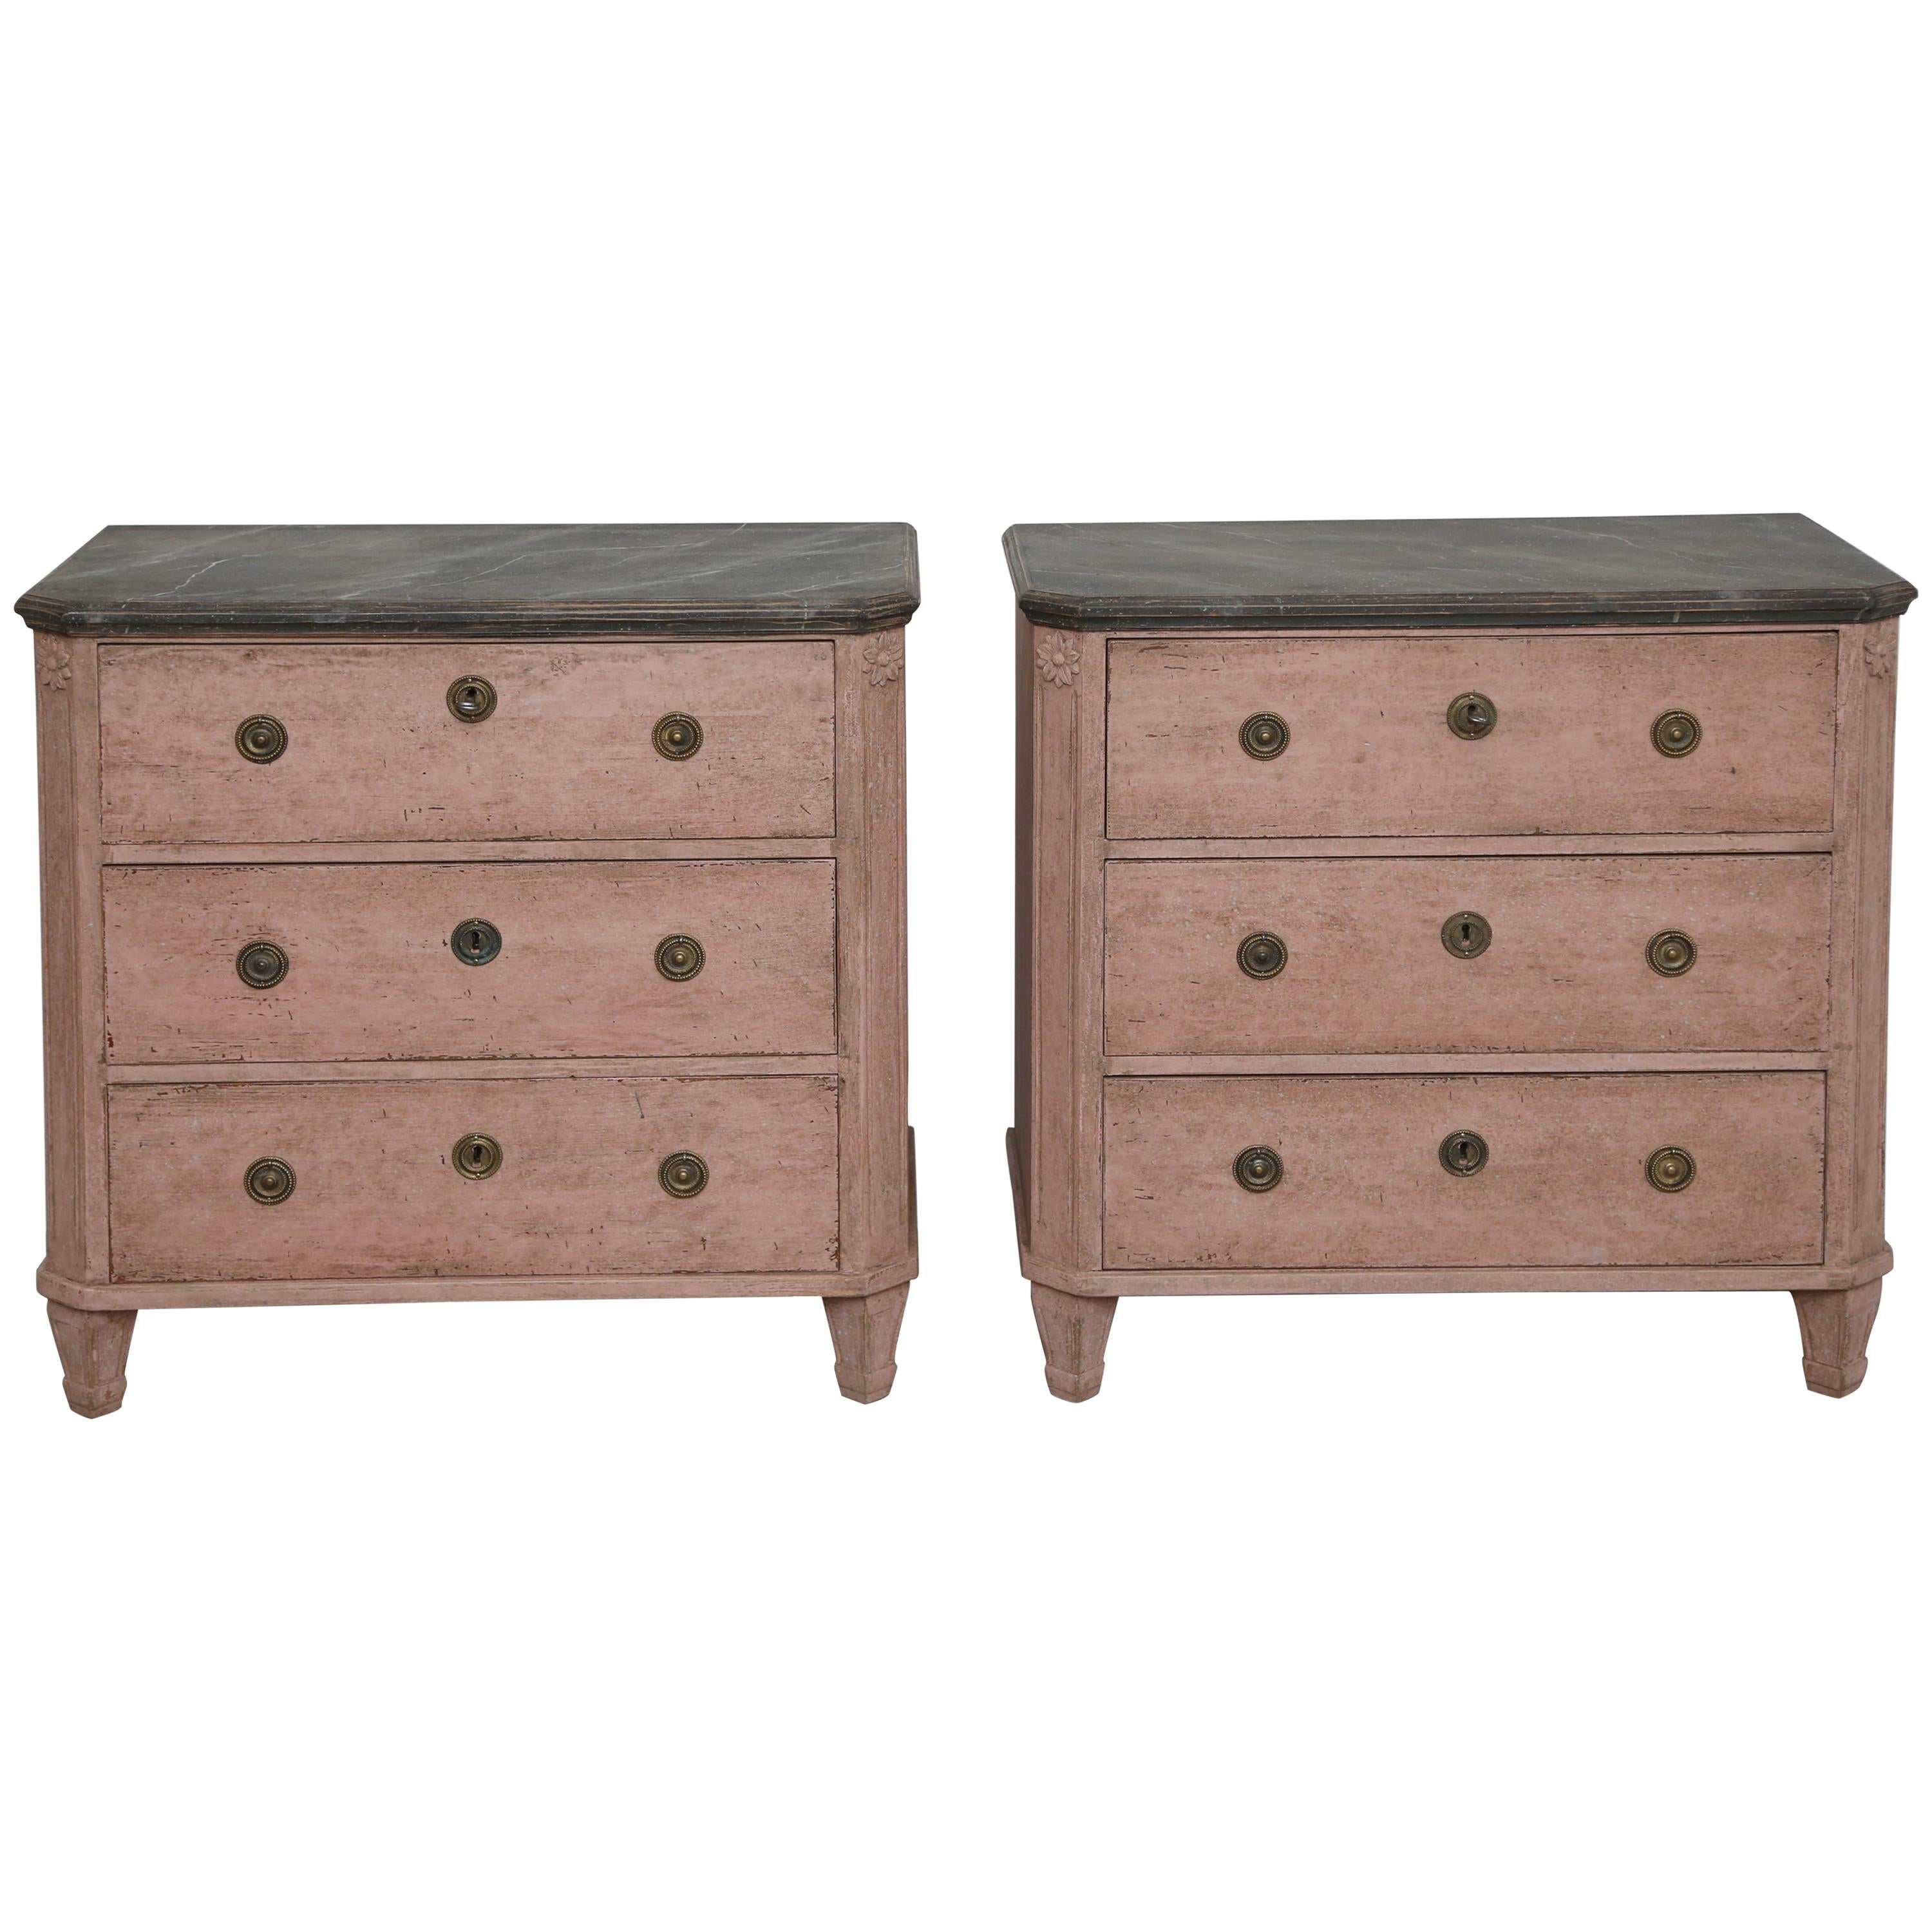 Antique Swedish Gustavian Style Rose Painted Chests with Faux Marble Tops, 